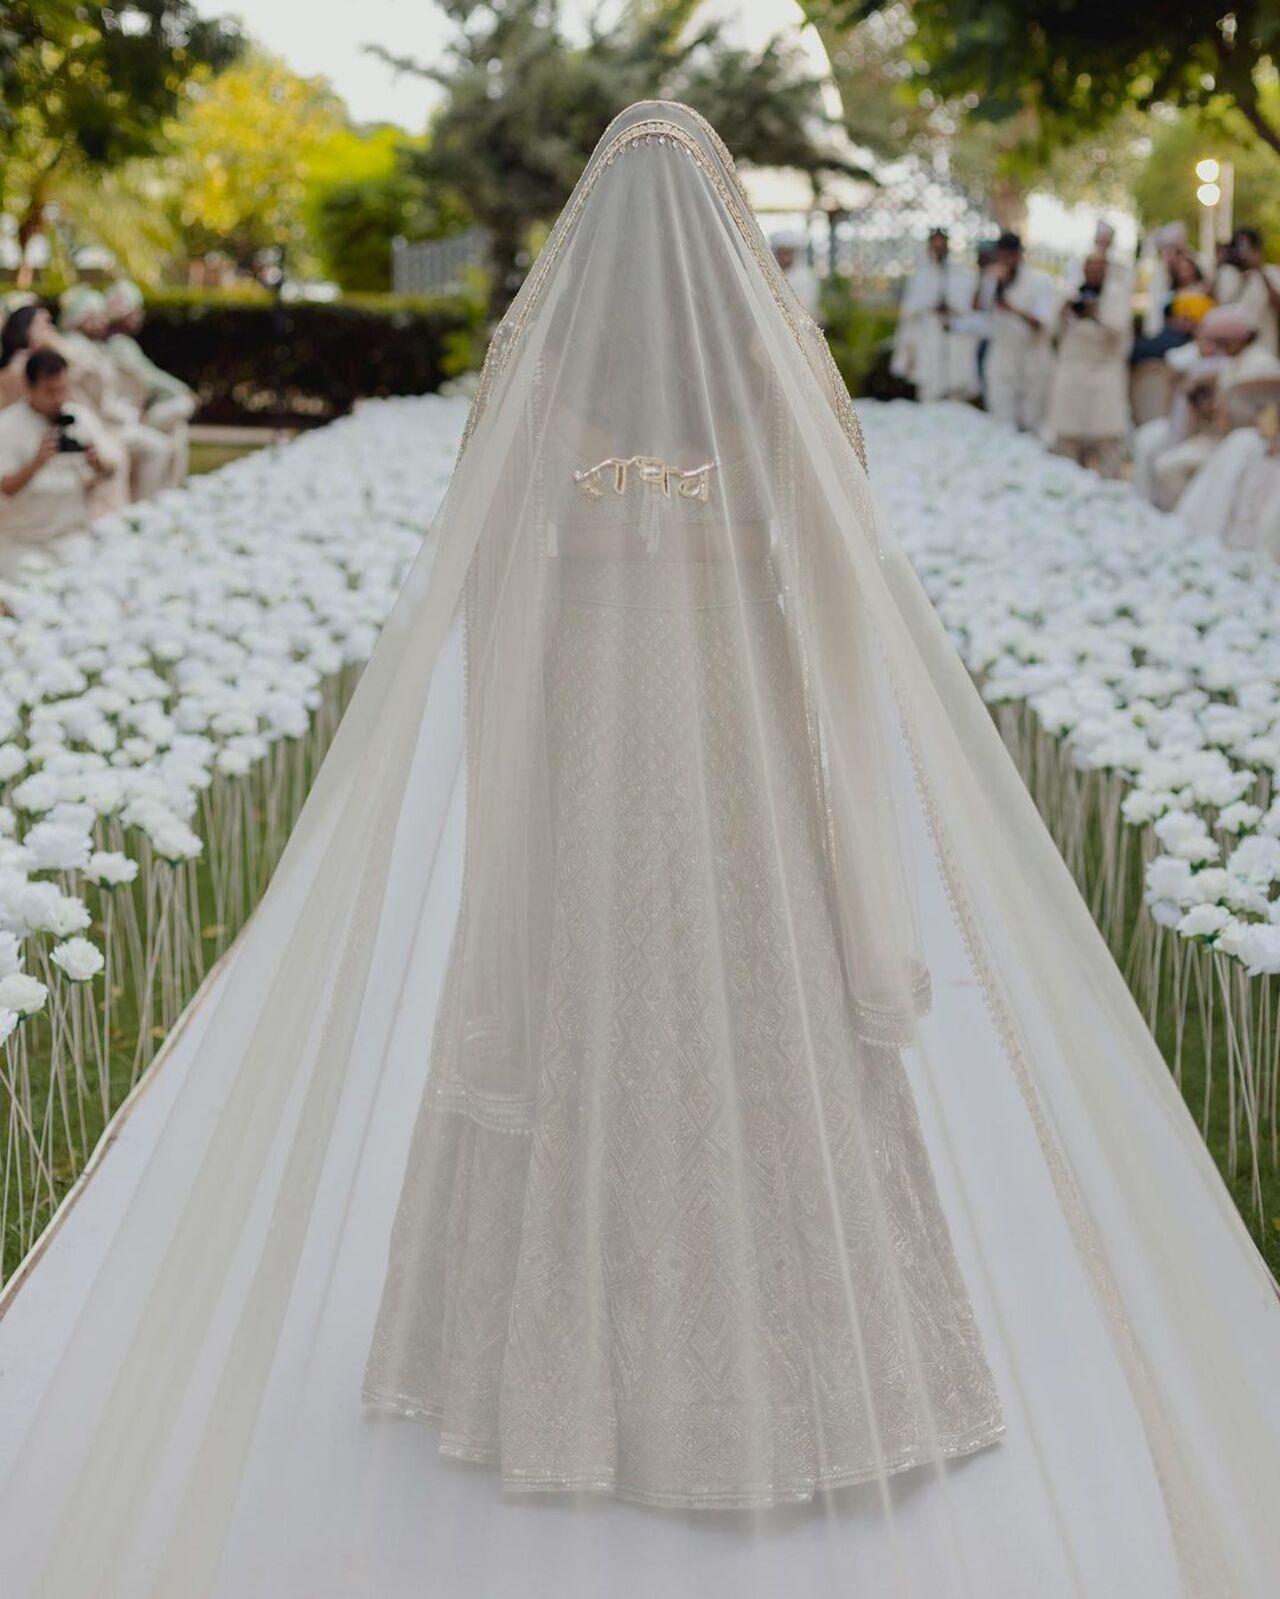 Parineeti Chopra walked down the aisle with a long white veil flowing from her head. The veil had the name of Raghav written on it in golden colour